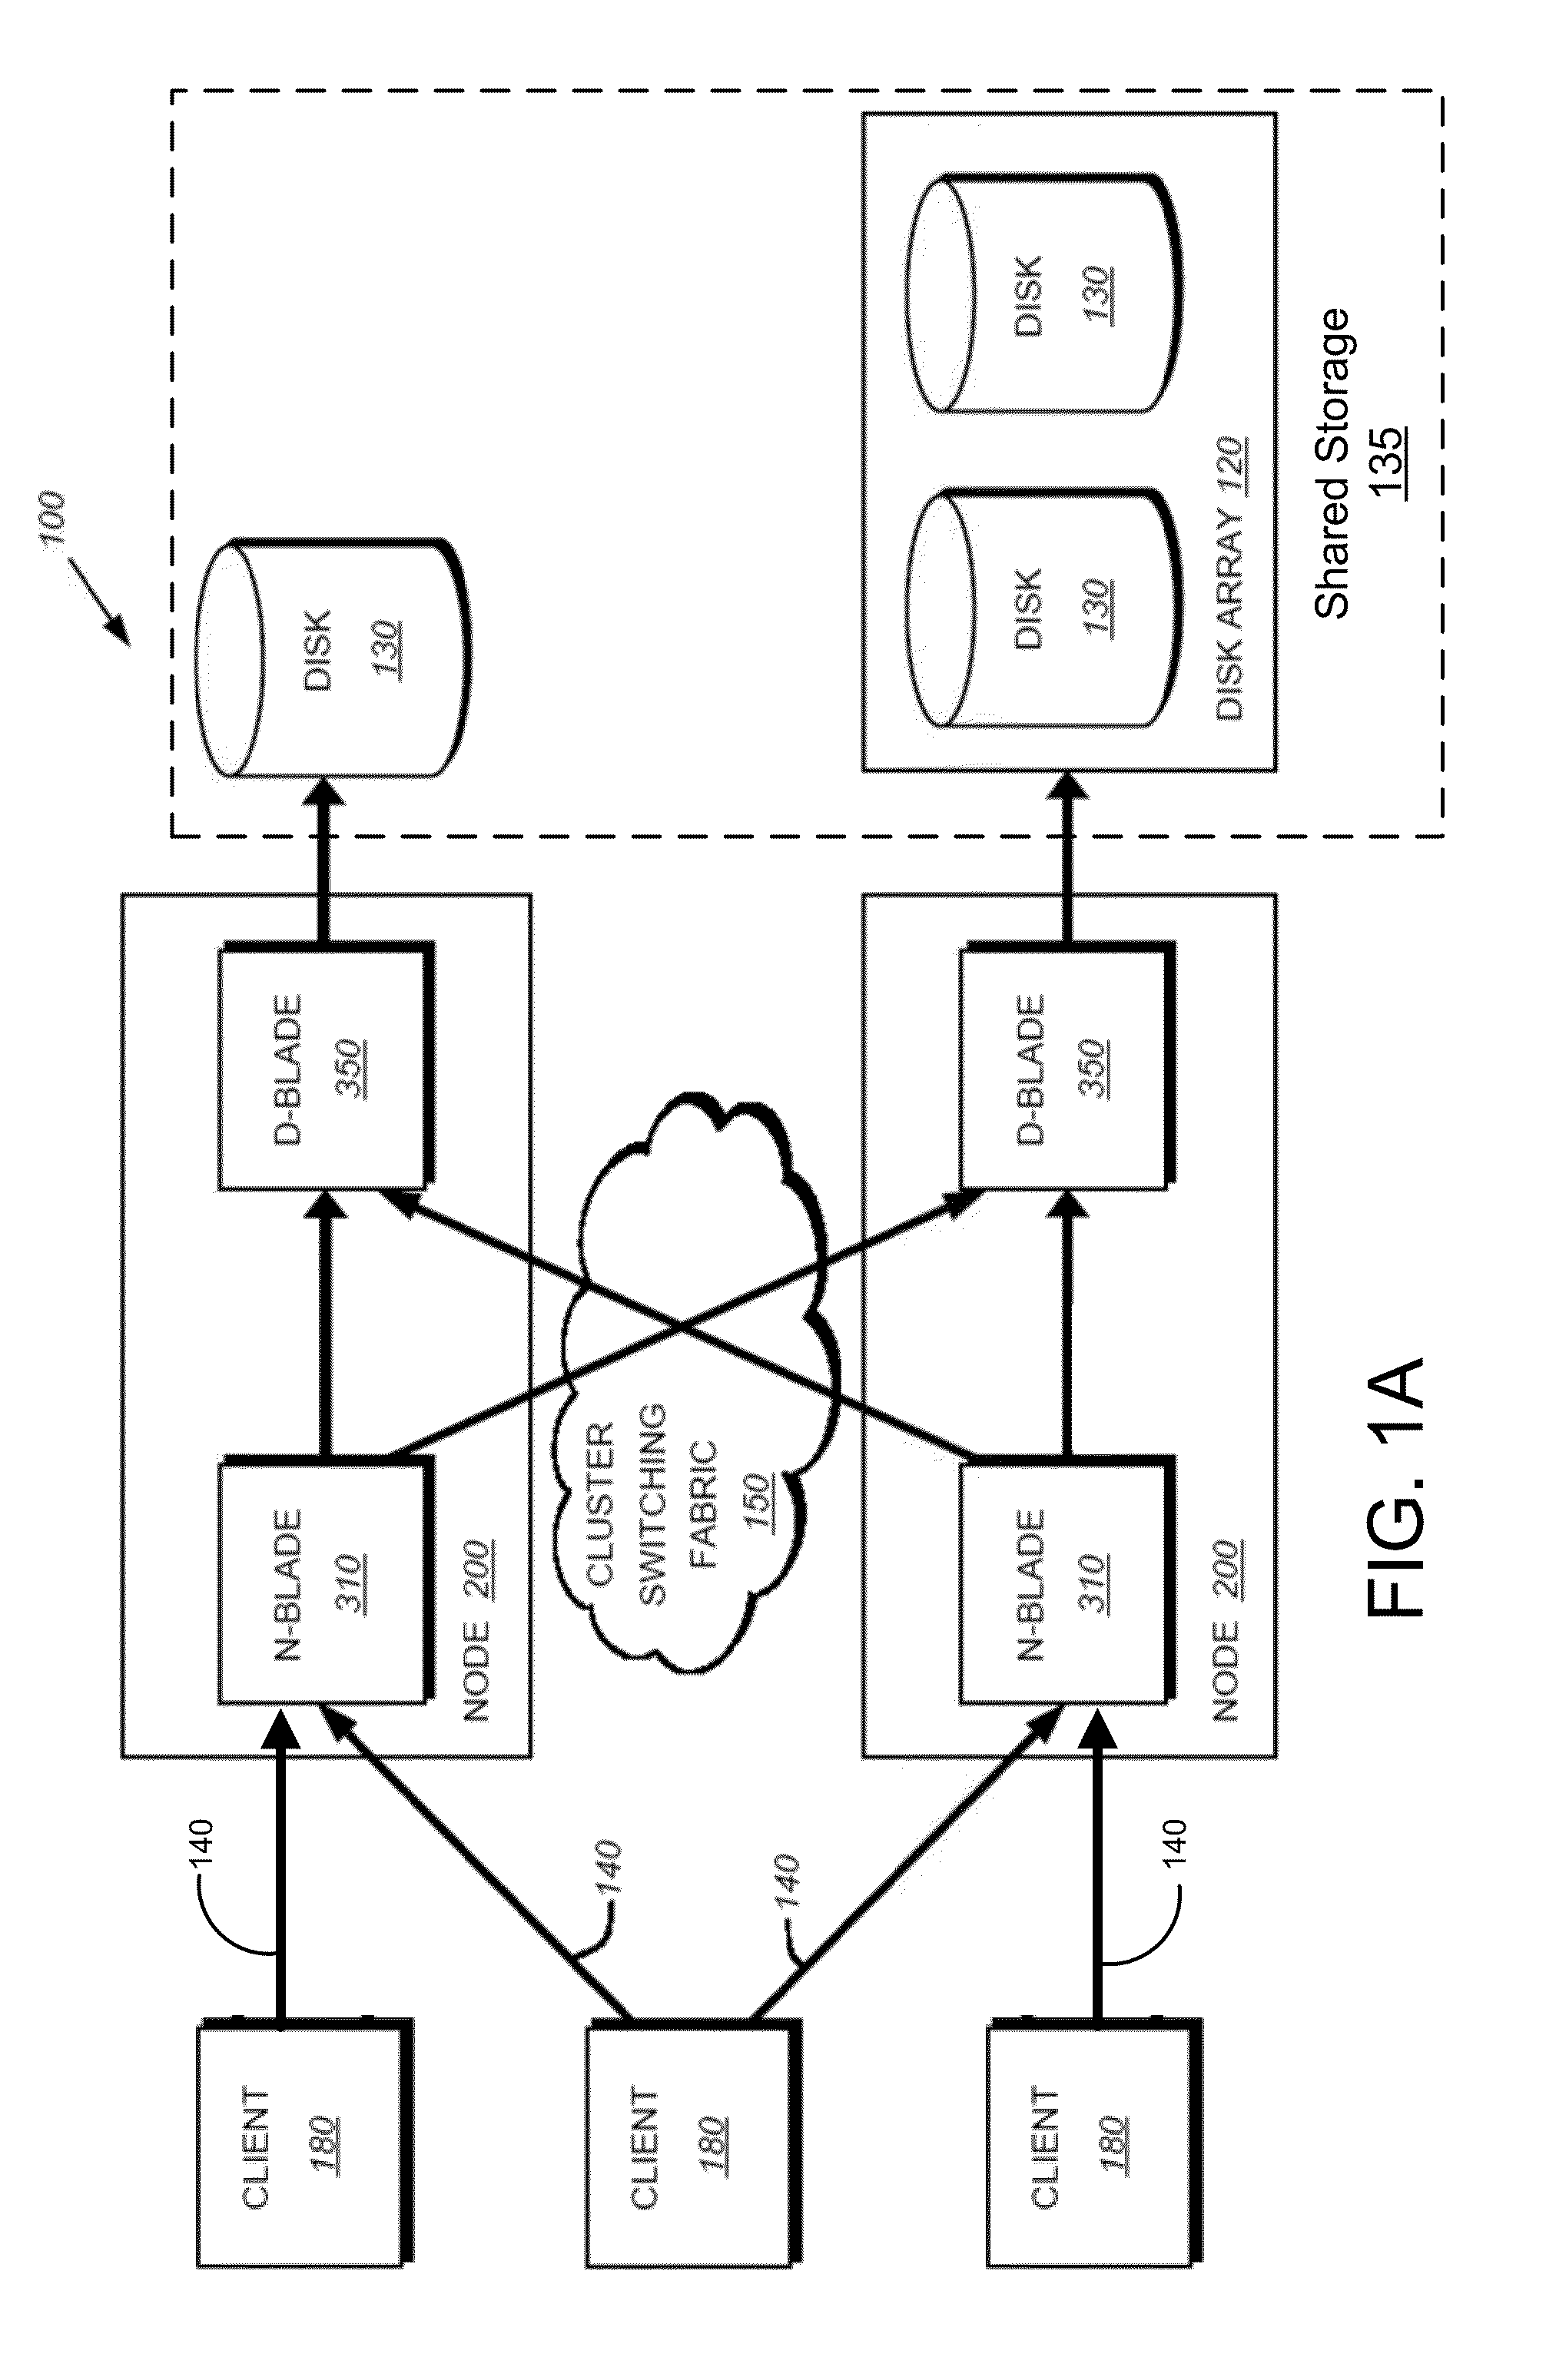 Coalescing Metadata for Mirroring to a Remote Storage Node in a Cluster Storage System